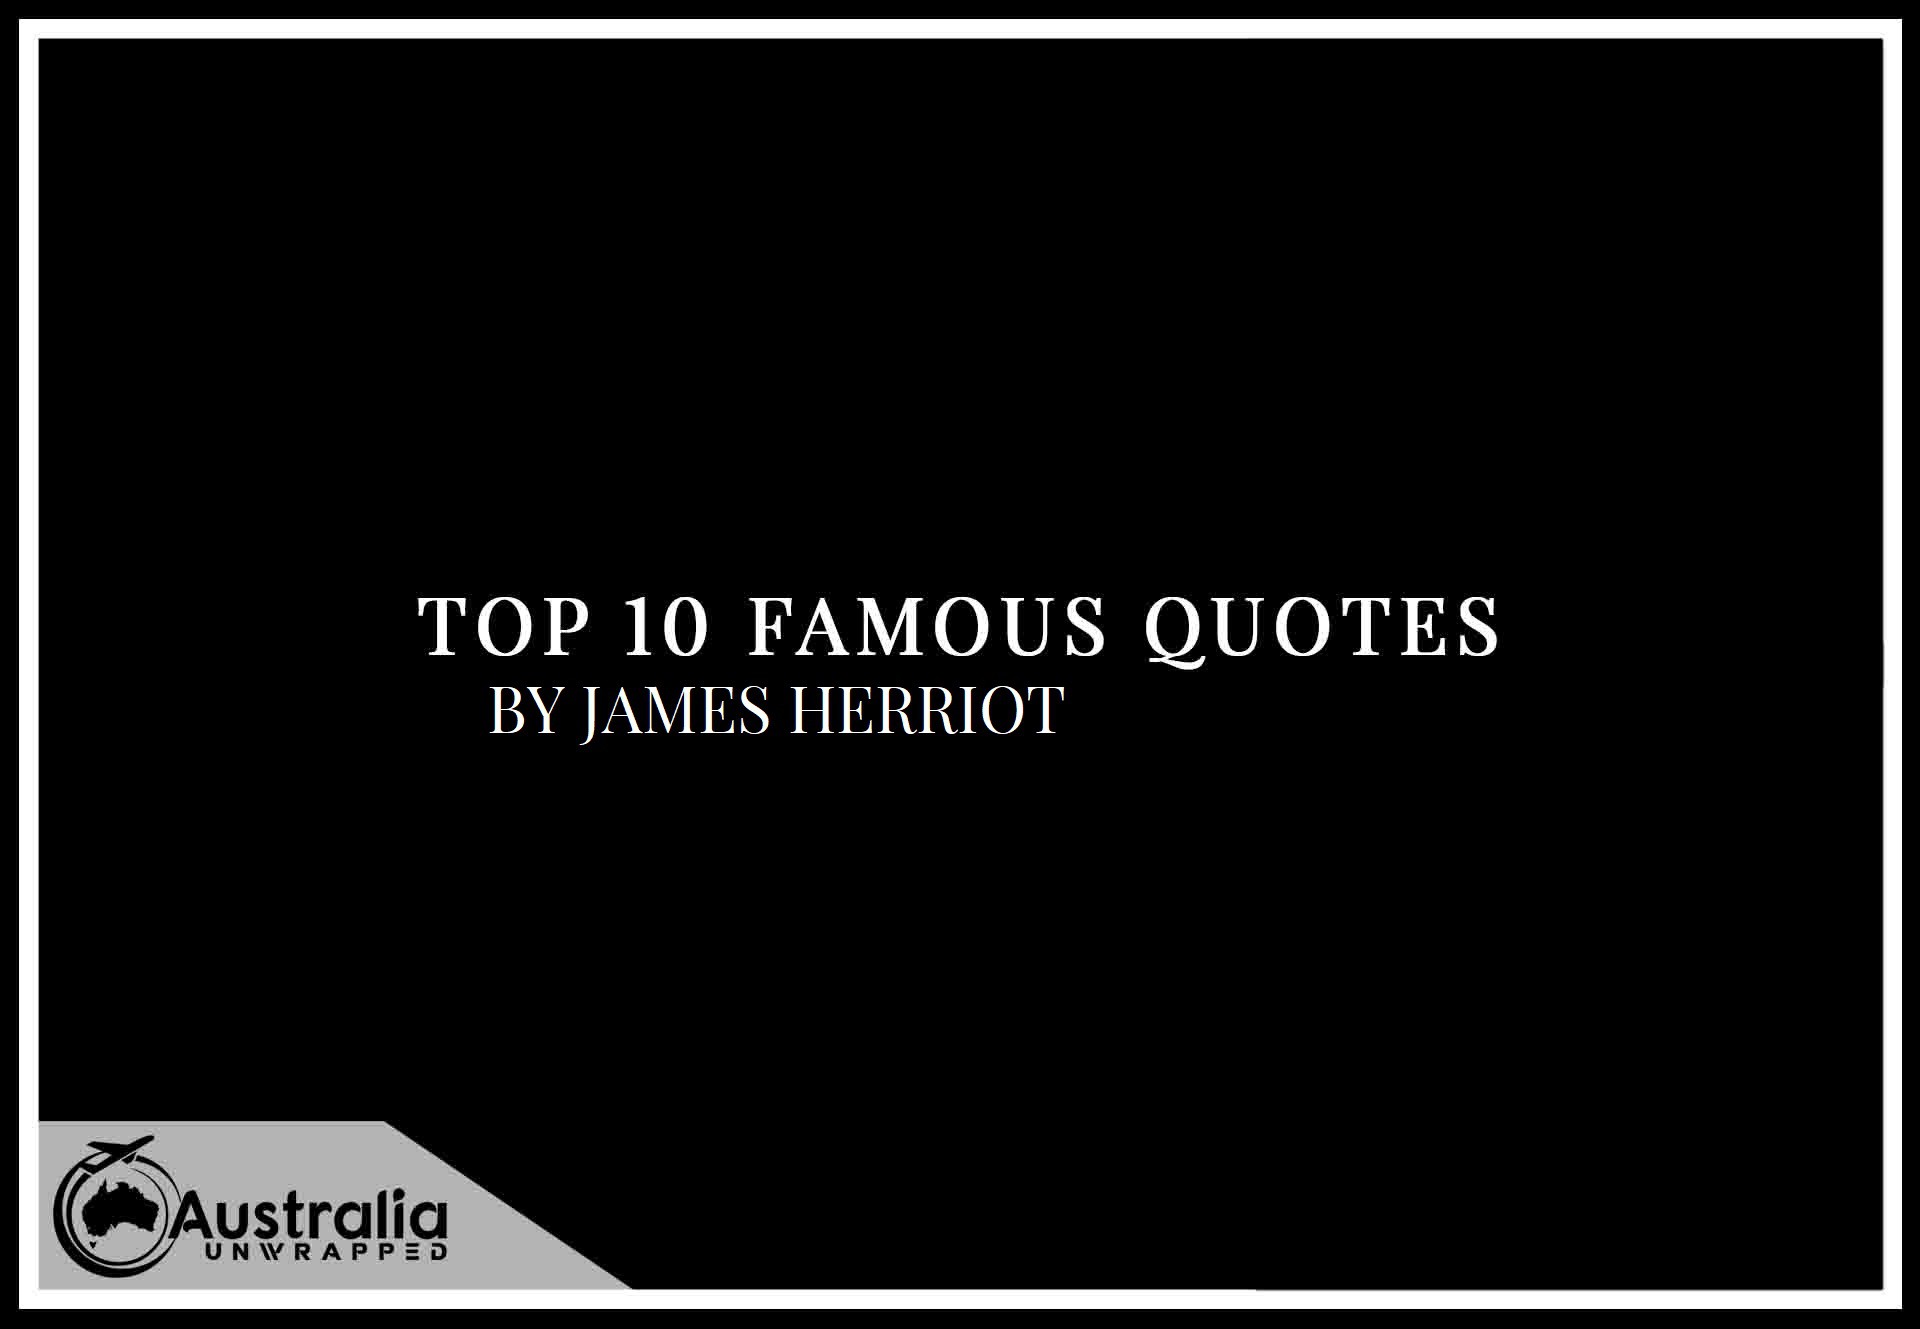 Top 10 Famous Quotes by Author James Herbert